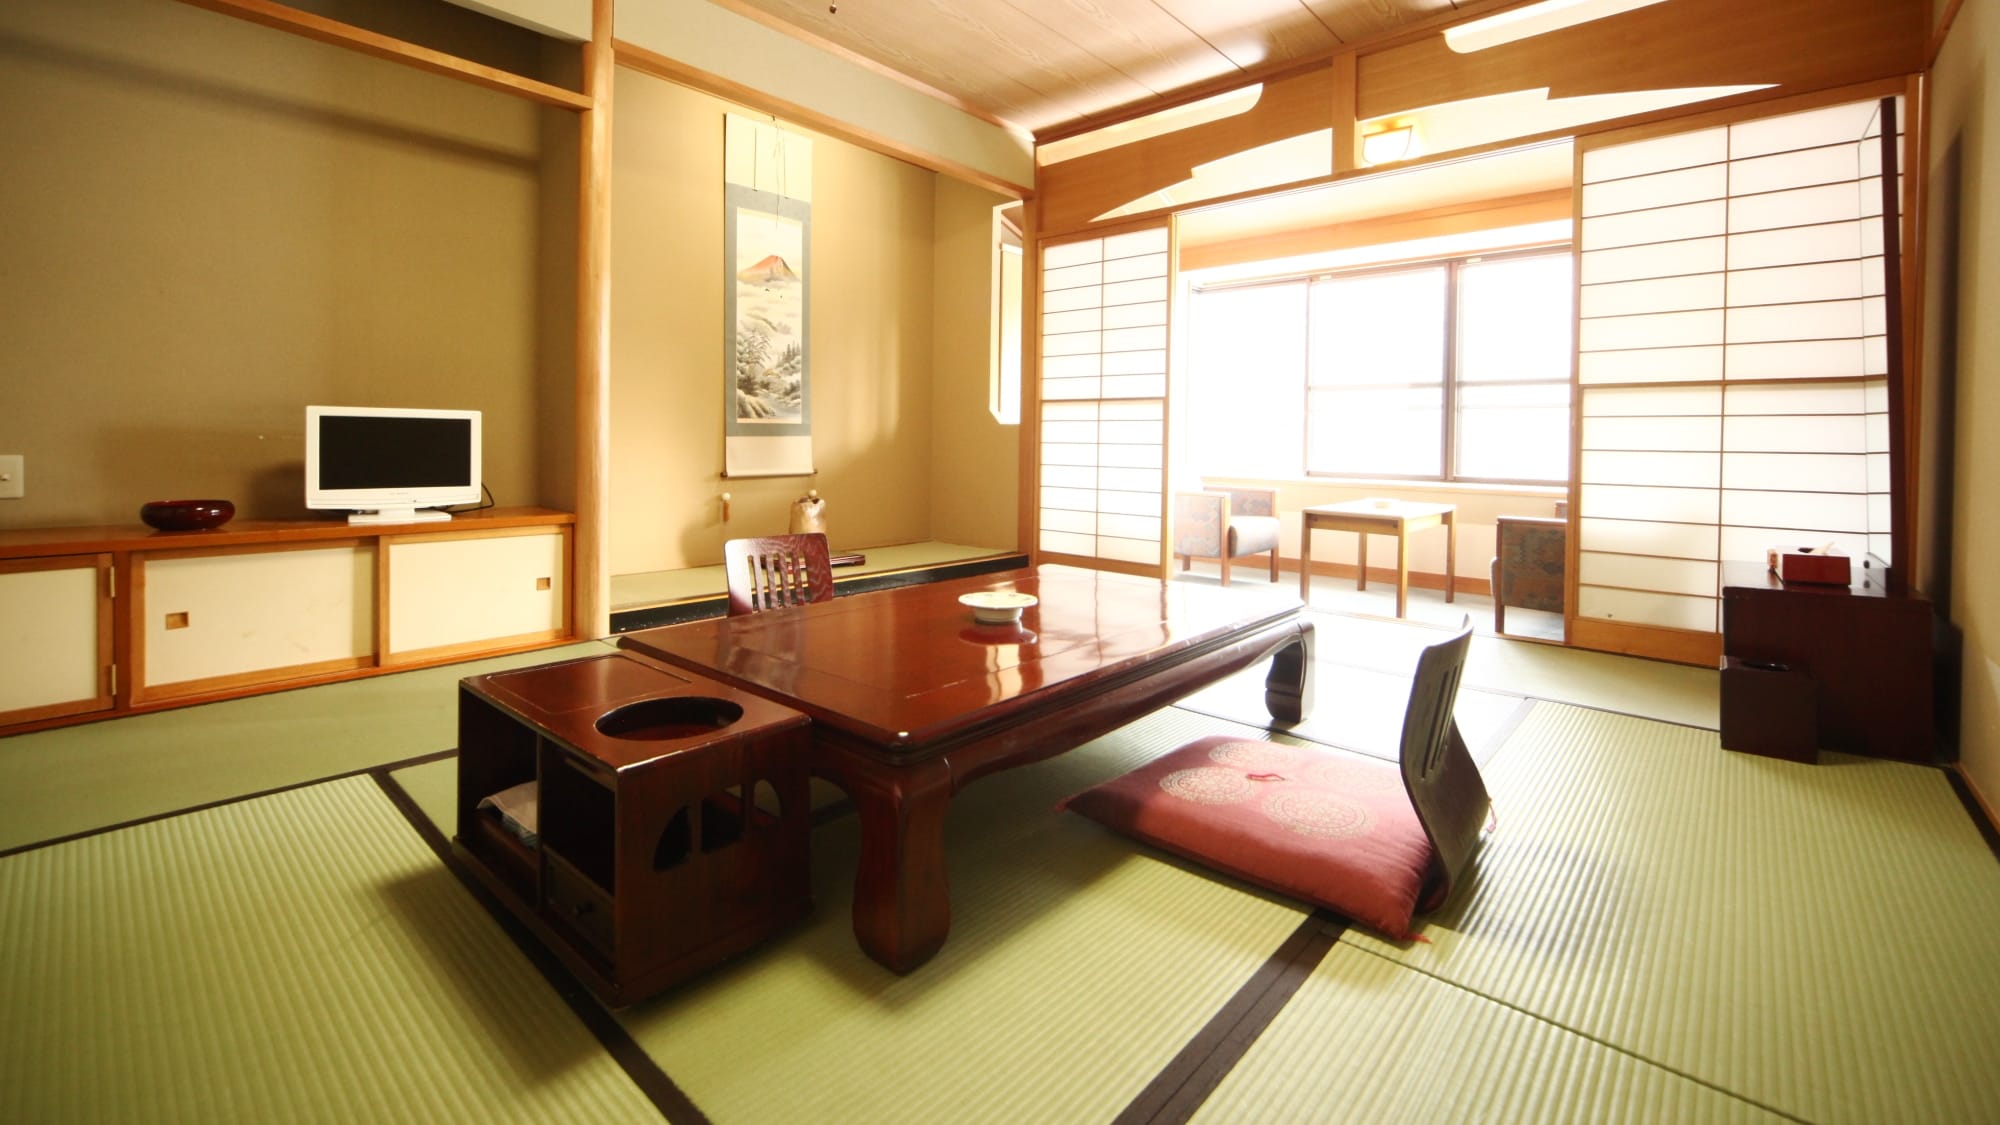 An example of a Japanese-style room (Japanese-style room type)